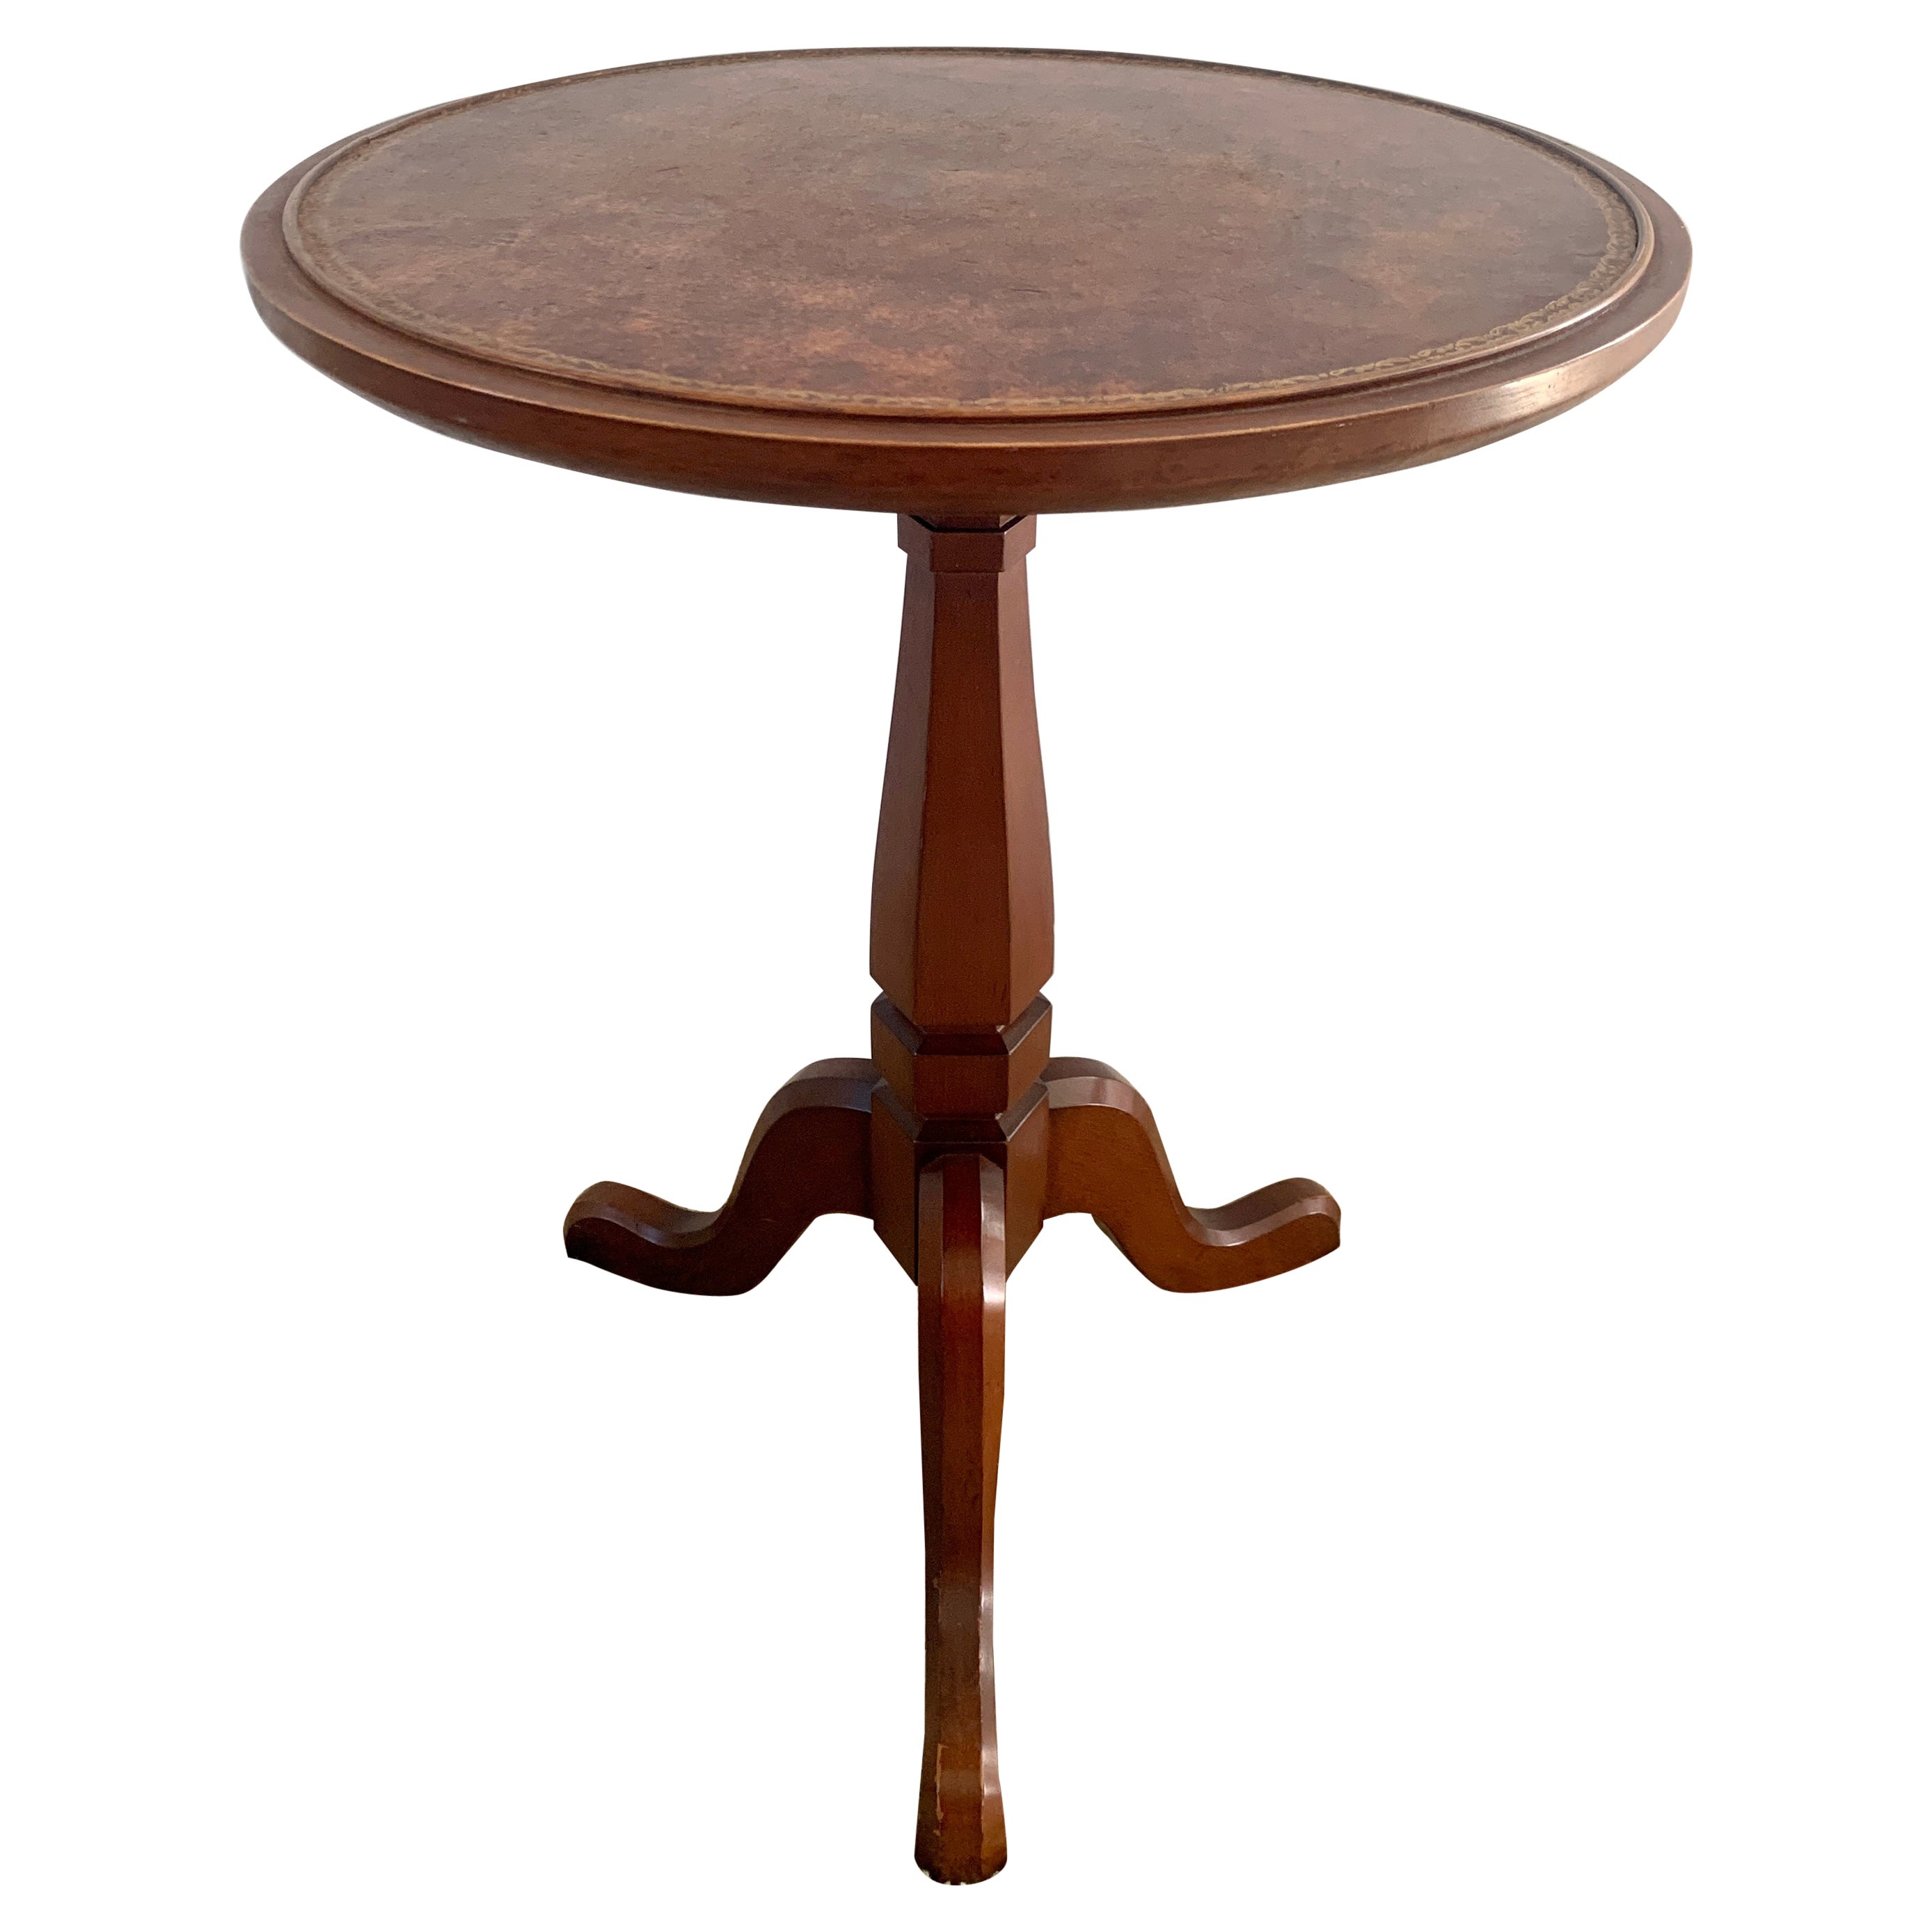 Vintage Georgian Embossed Leather Top Cherry Wood Round Side Table For Sale